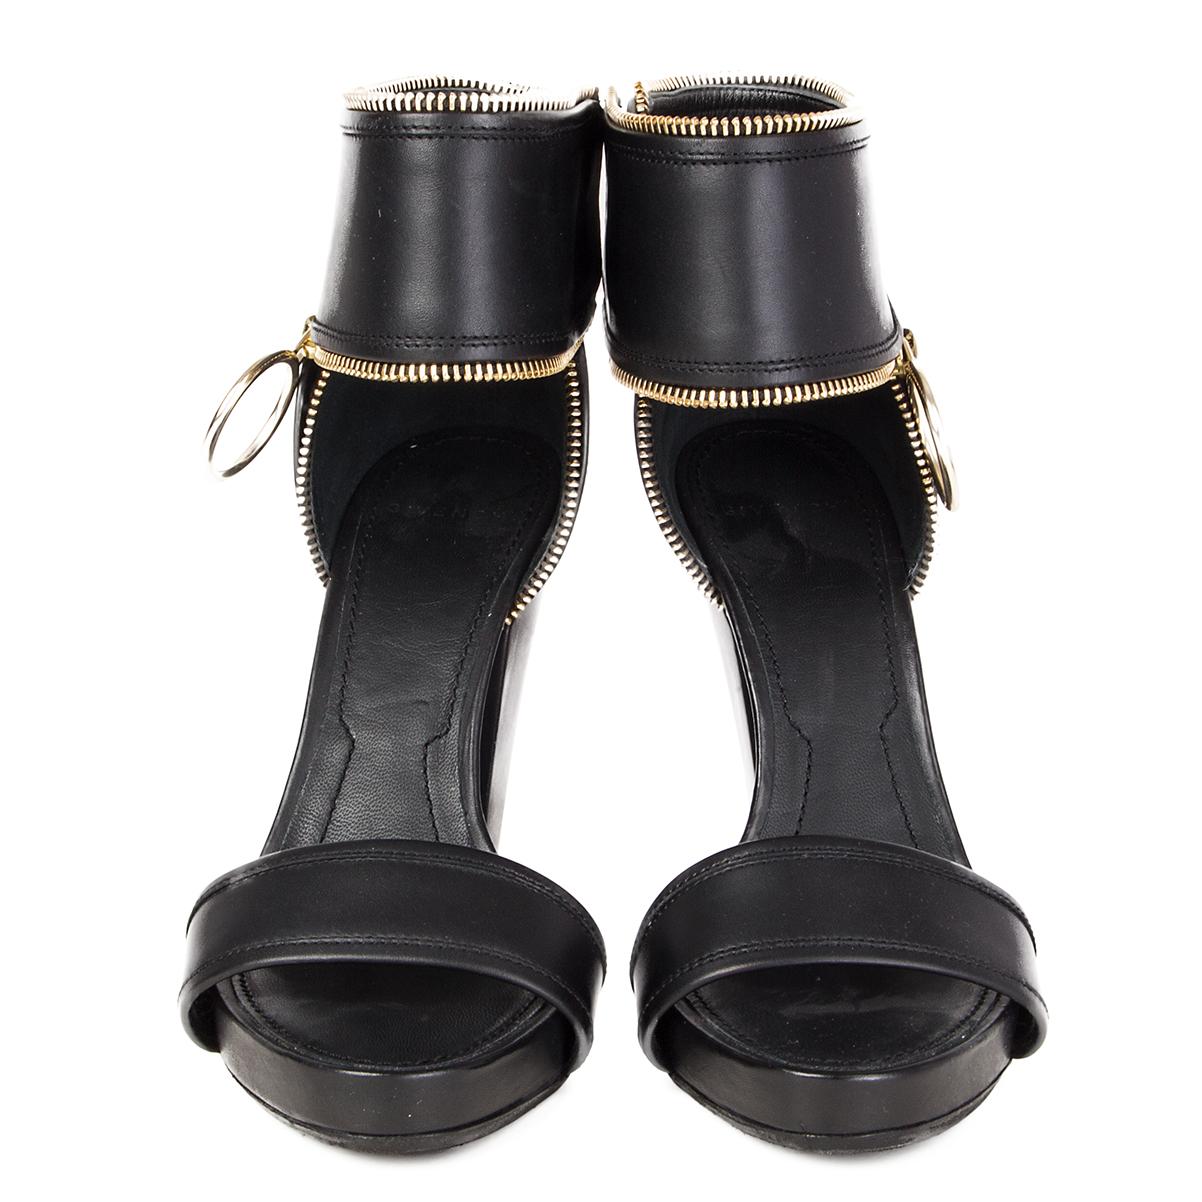 100% authentic Givenchy ankle-strap platform sandals feature a single band at the vamp and elastic double-snap closure at the ankle. Gold-tone metal ring pull and zipper detail at the ankle strap. Have been worn and are in excellent condition. Black